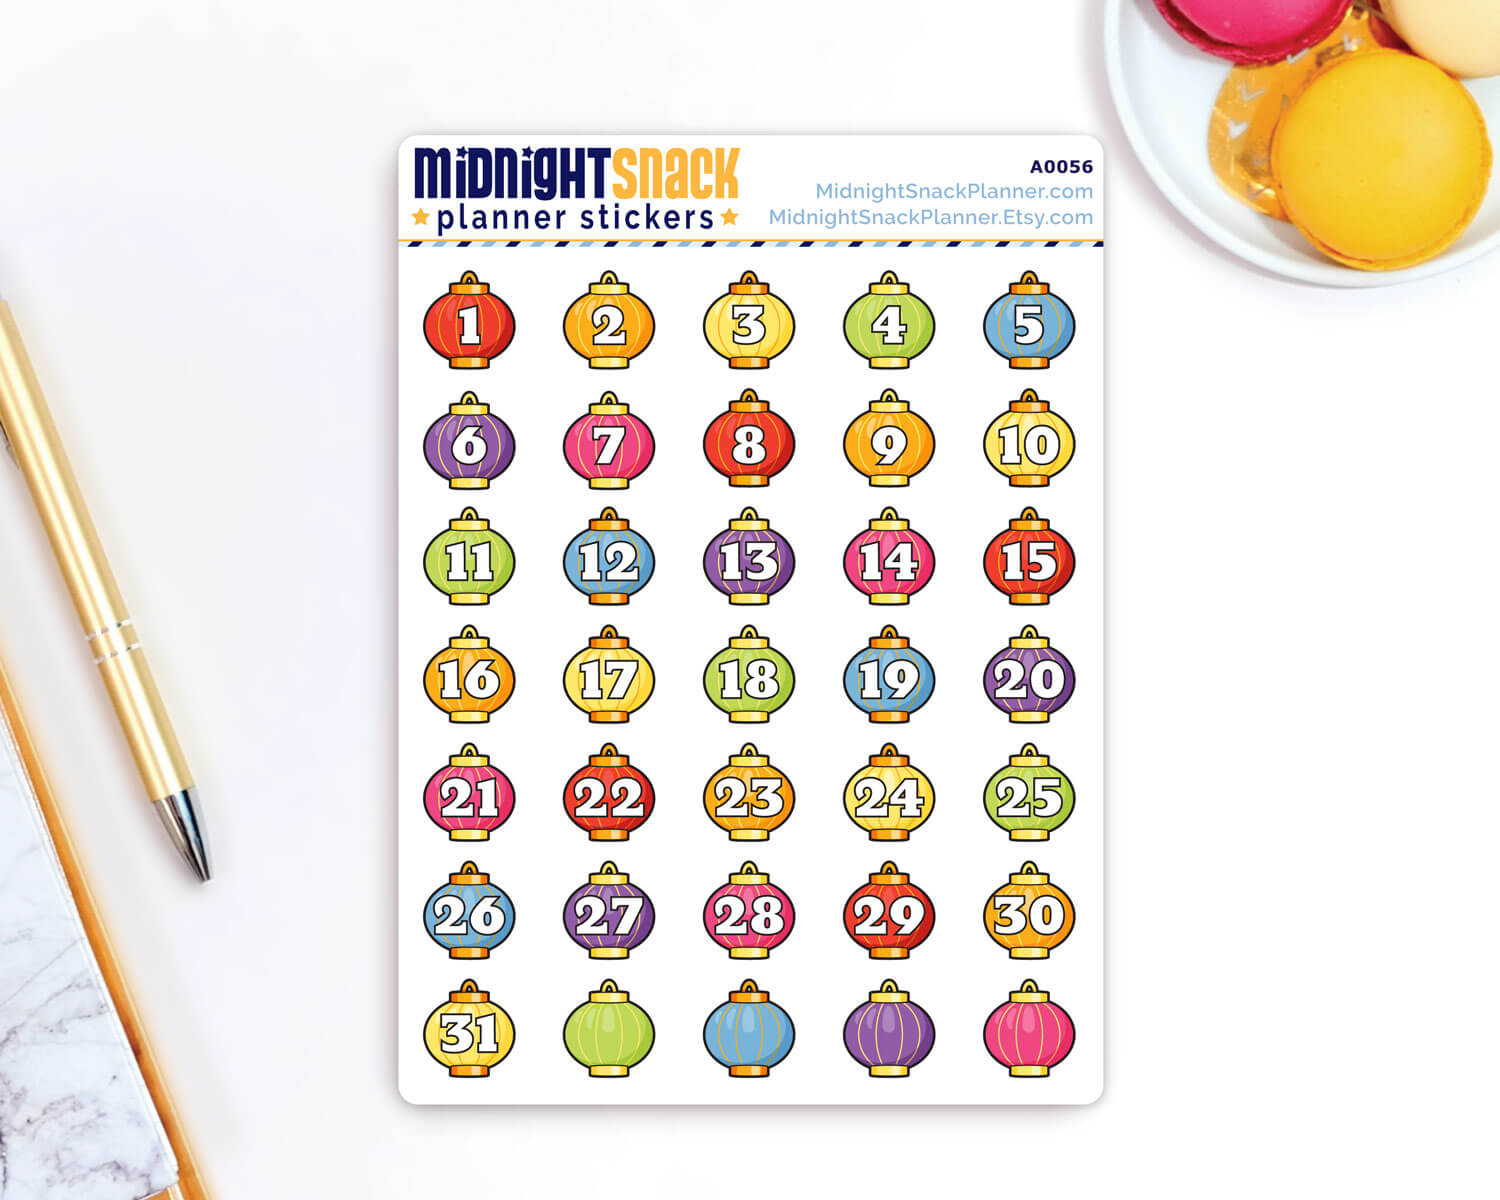 Paper Lantern Date Cover Planner Stickers from Midnight Snack Planner